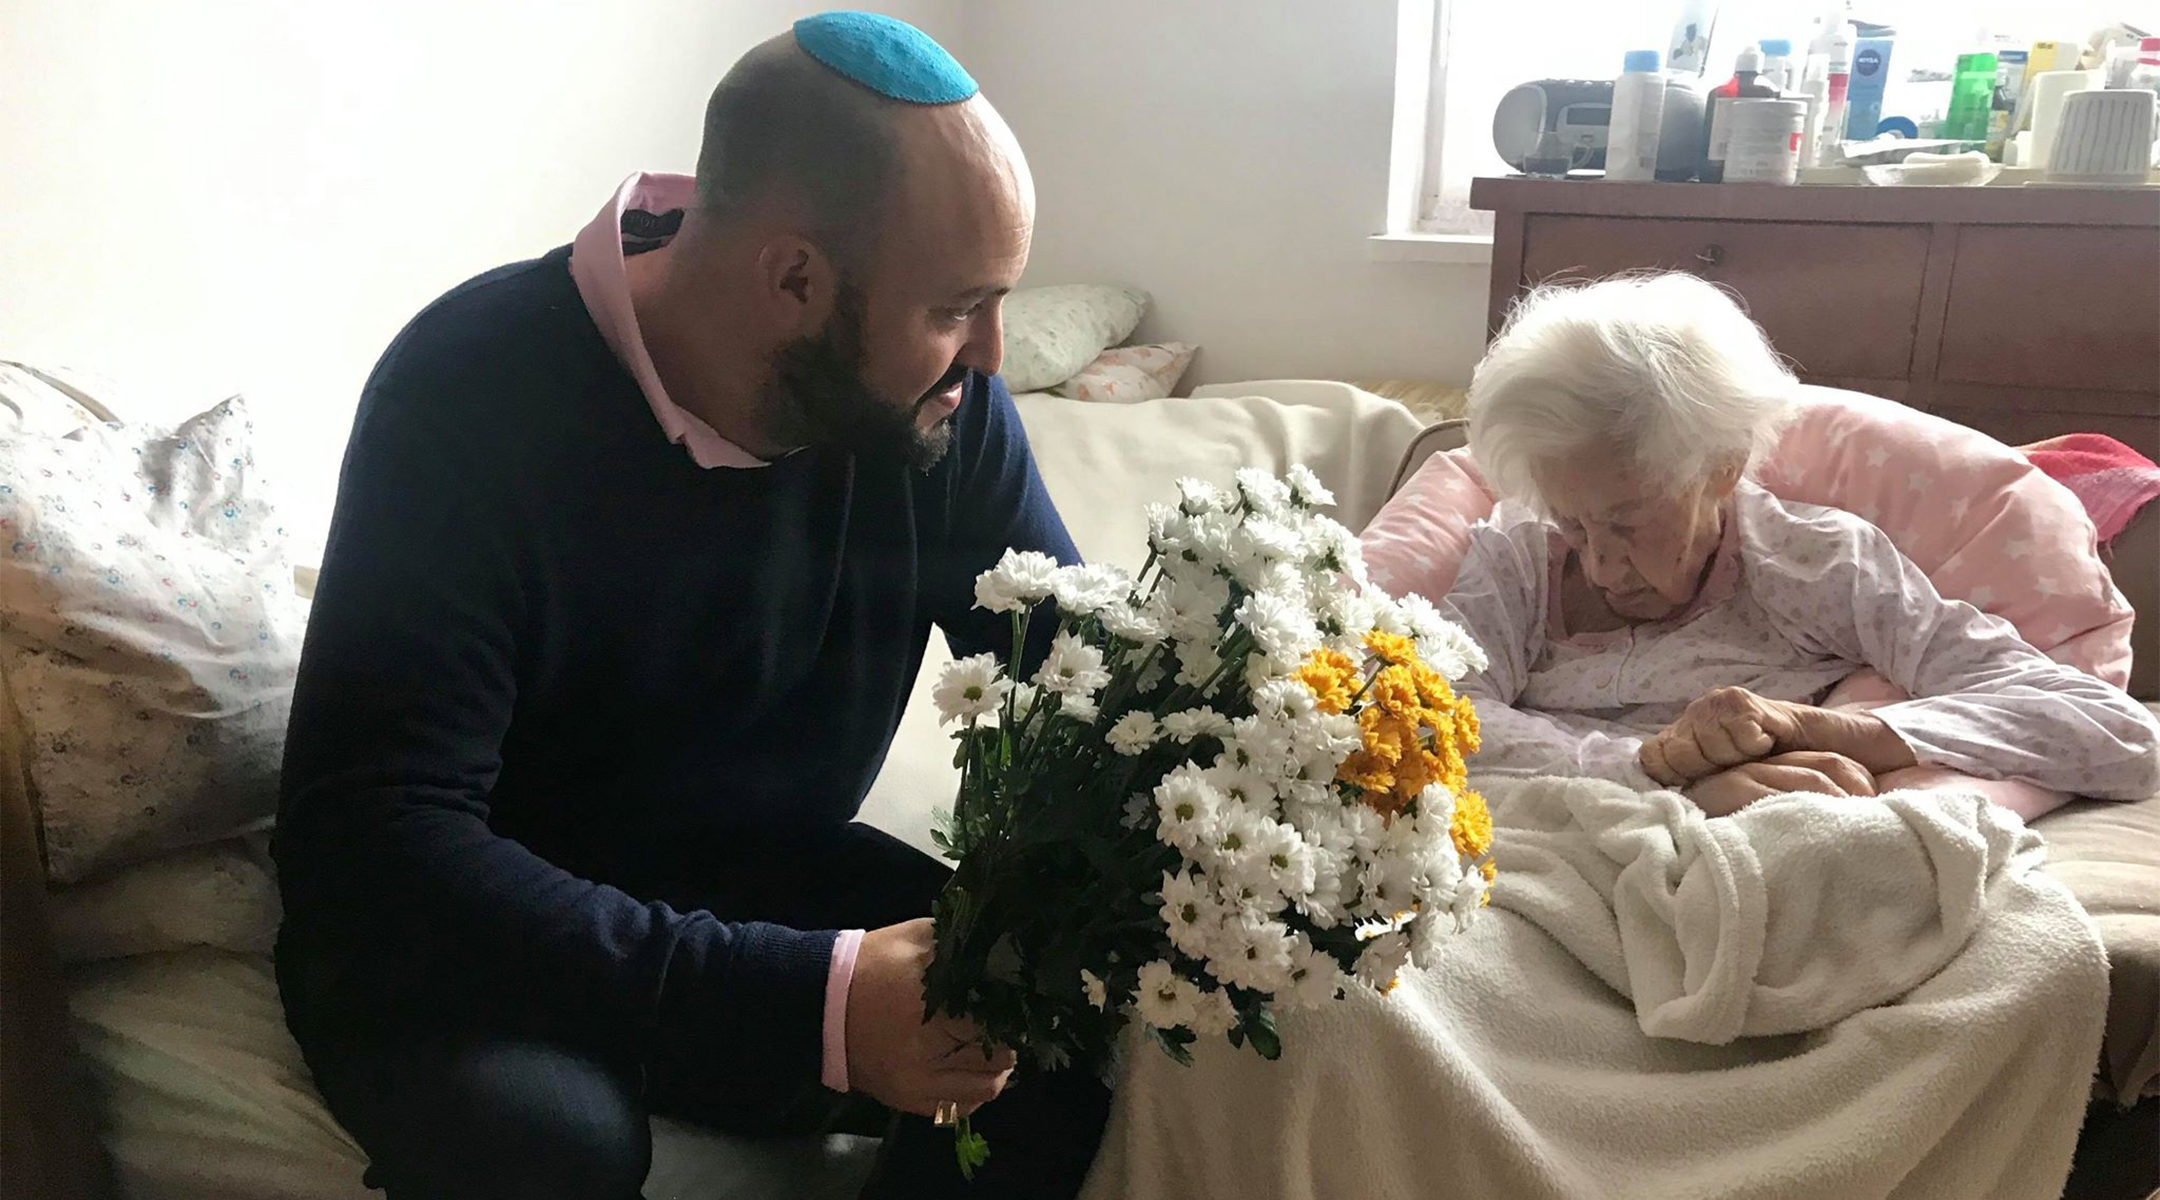 Krystyna Danko receiving flowers from Jonny Daniels on in her apartment in Warsaw, Poland on her 102nd birthday on July 9, 2019. (From the Depths)